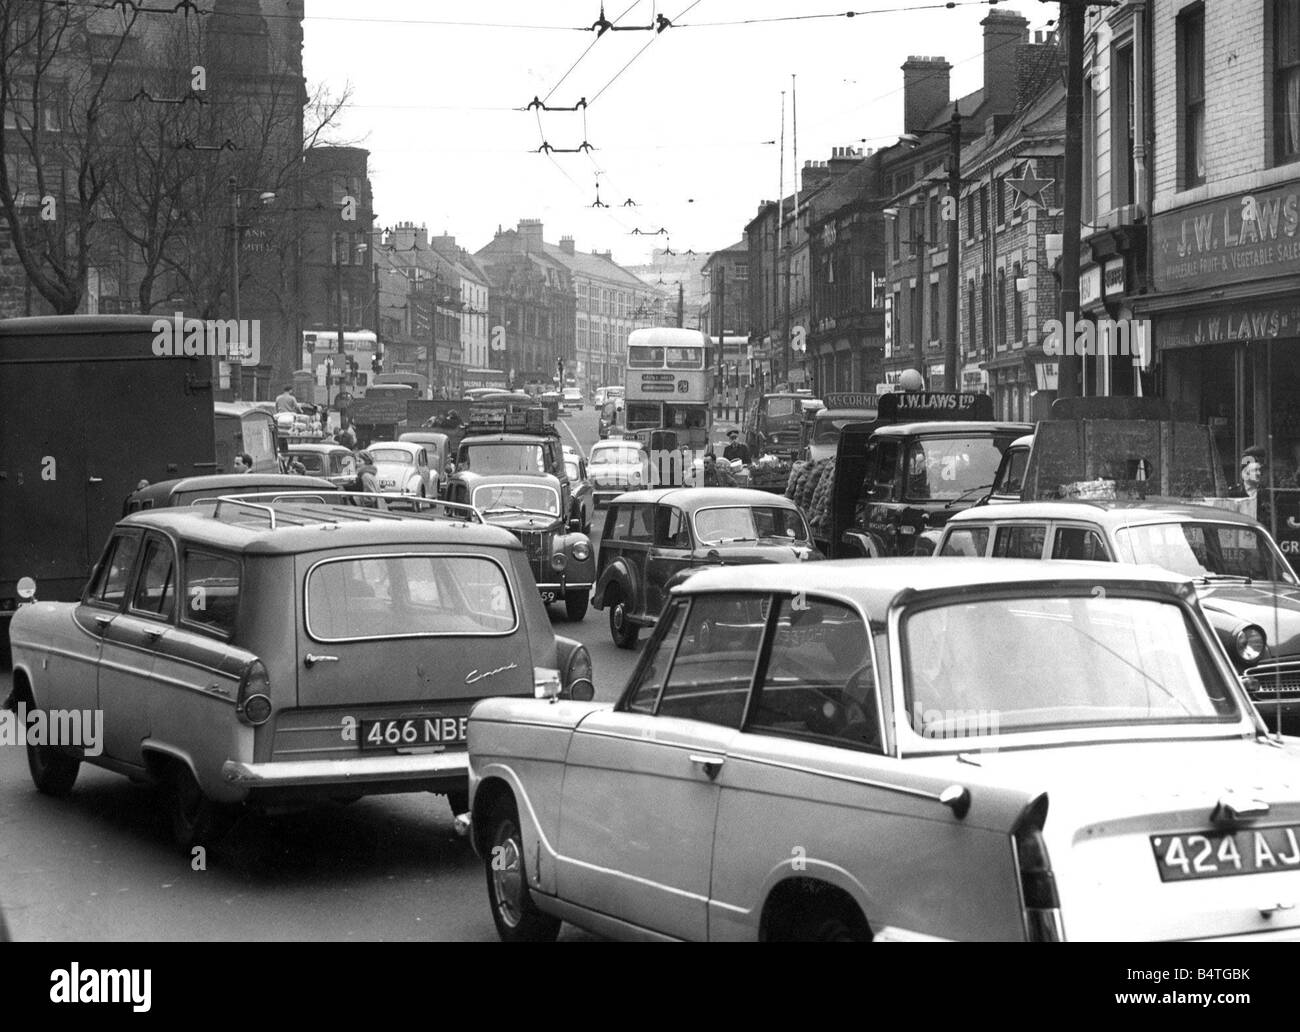 Traffic in Newcastle s Newgate Street is choc a block in 1965 Triumph Herald car in the foreground Stock Photo